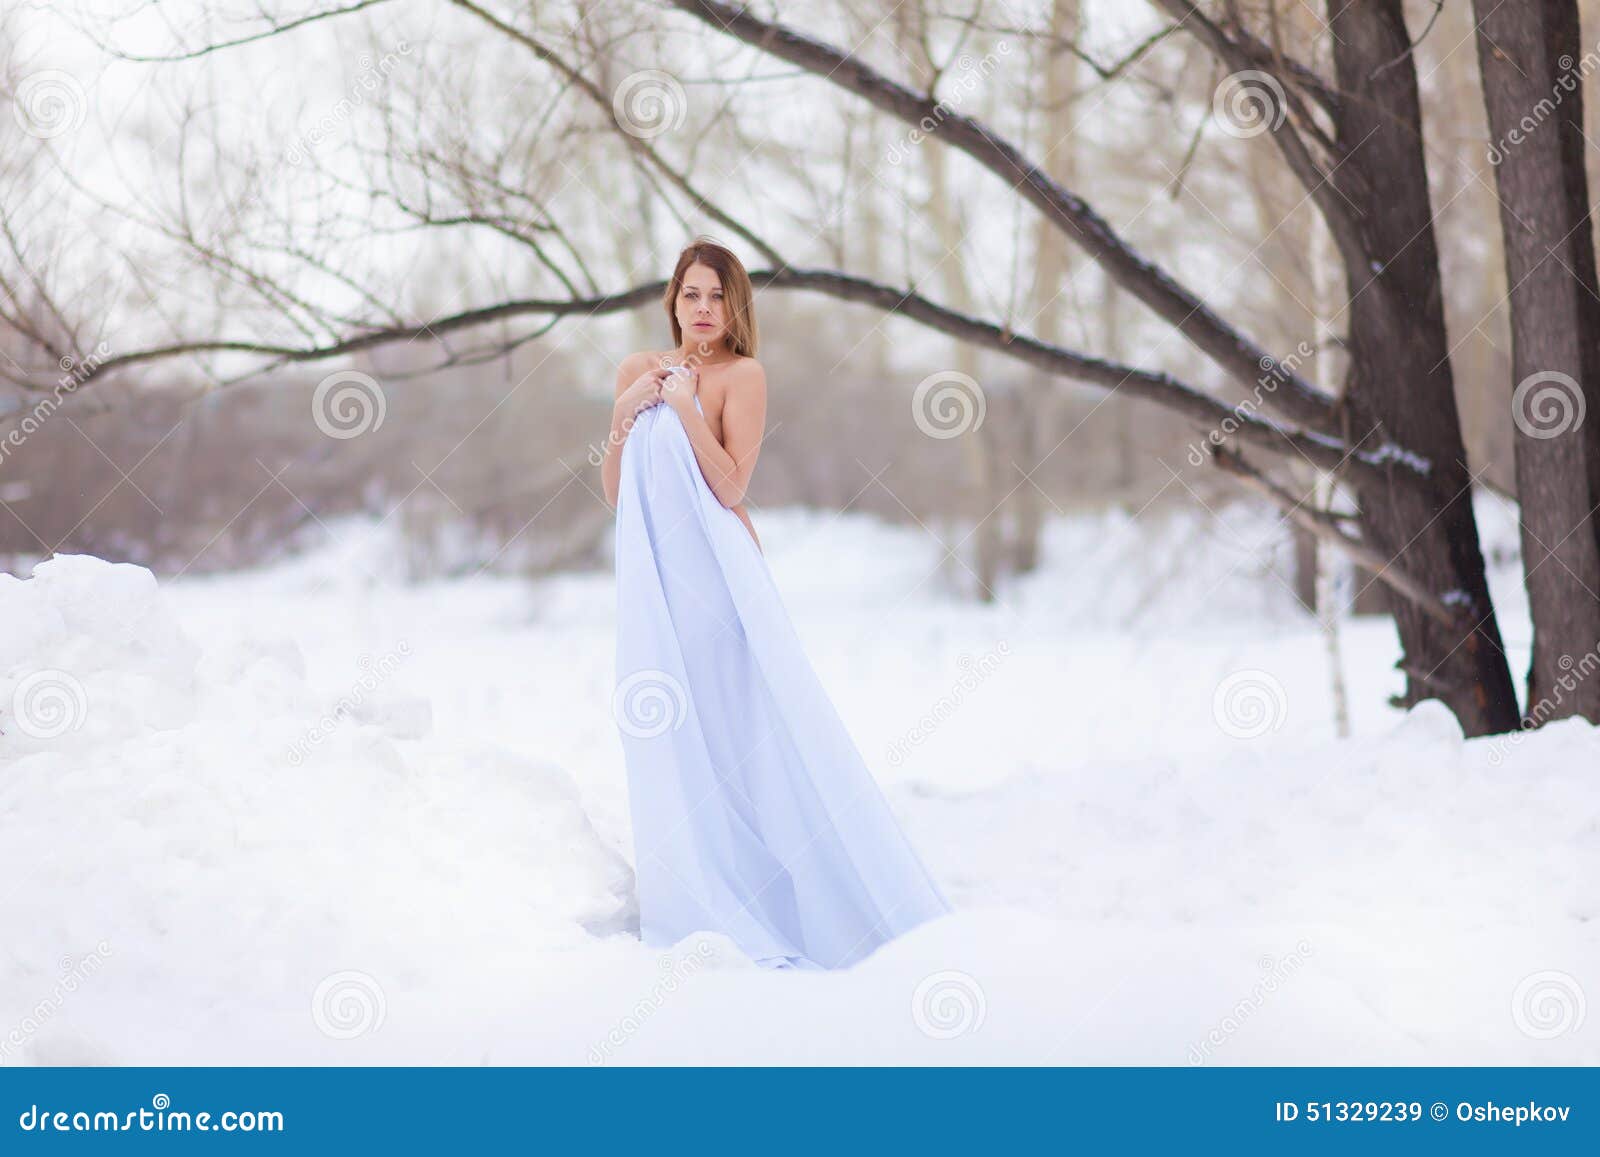 Naked Girl In Winter Forest Stock Image Image Of Model Cold 51329239